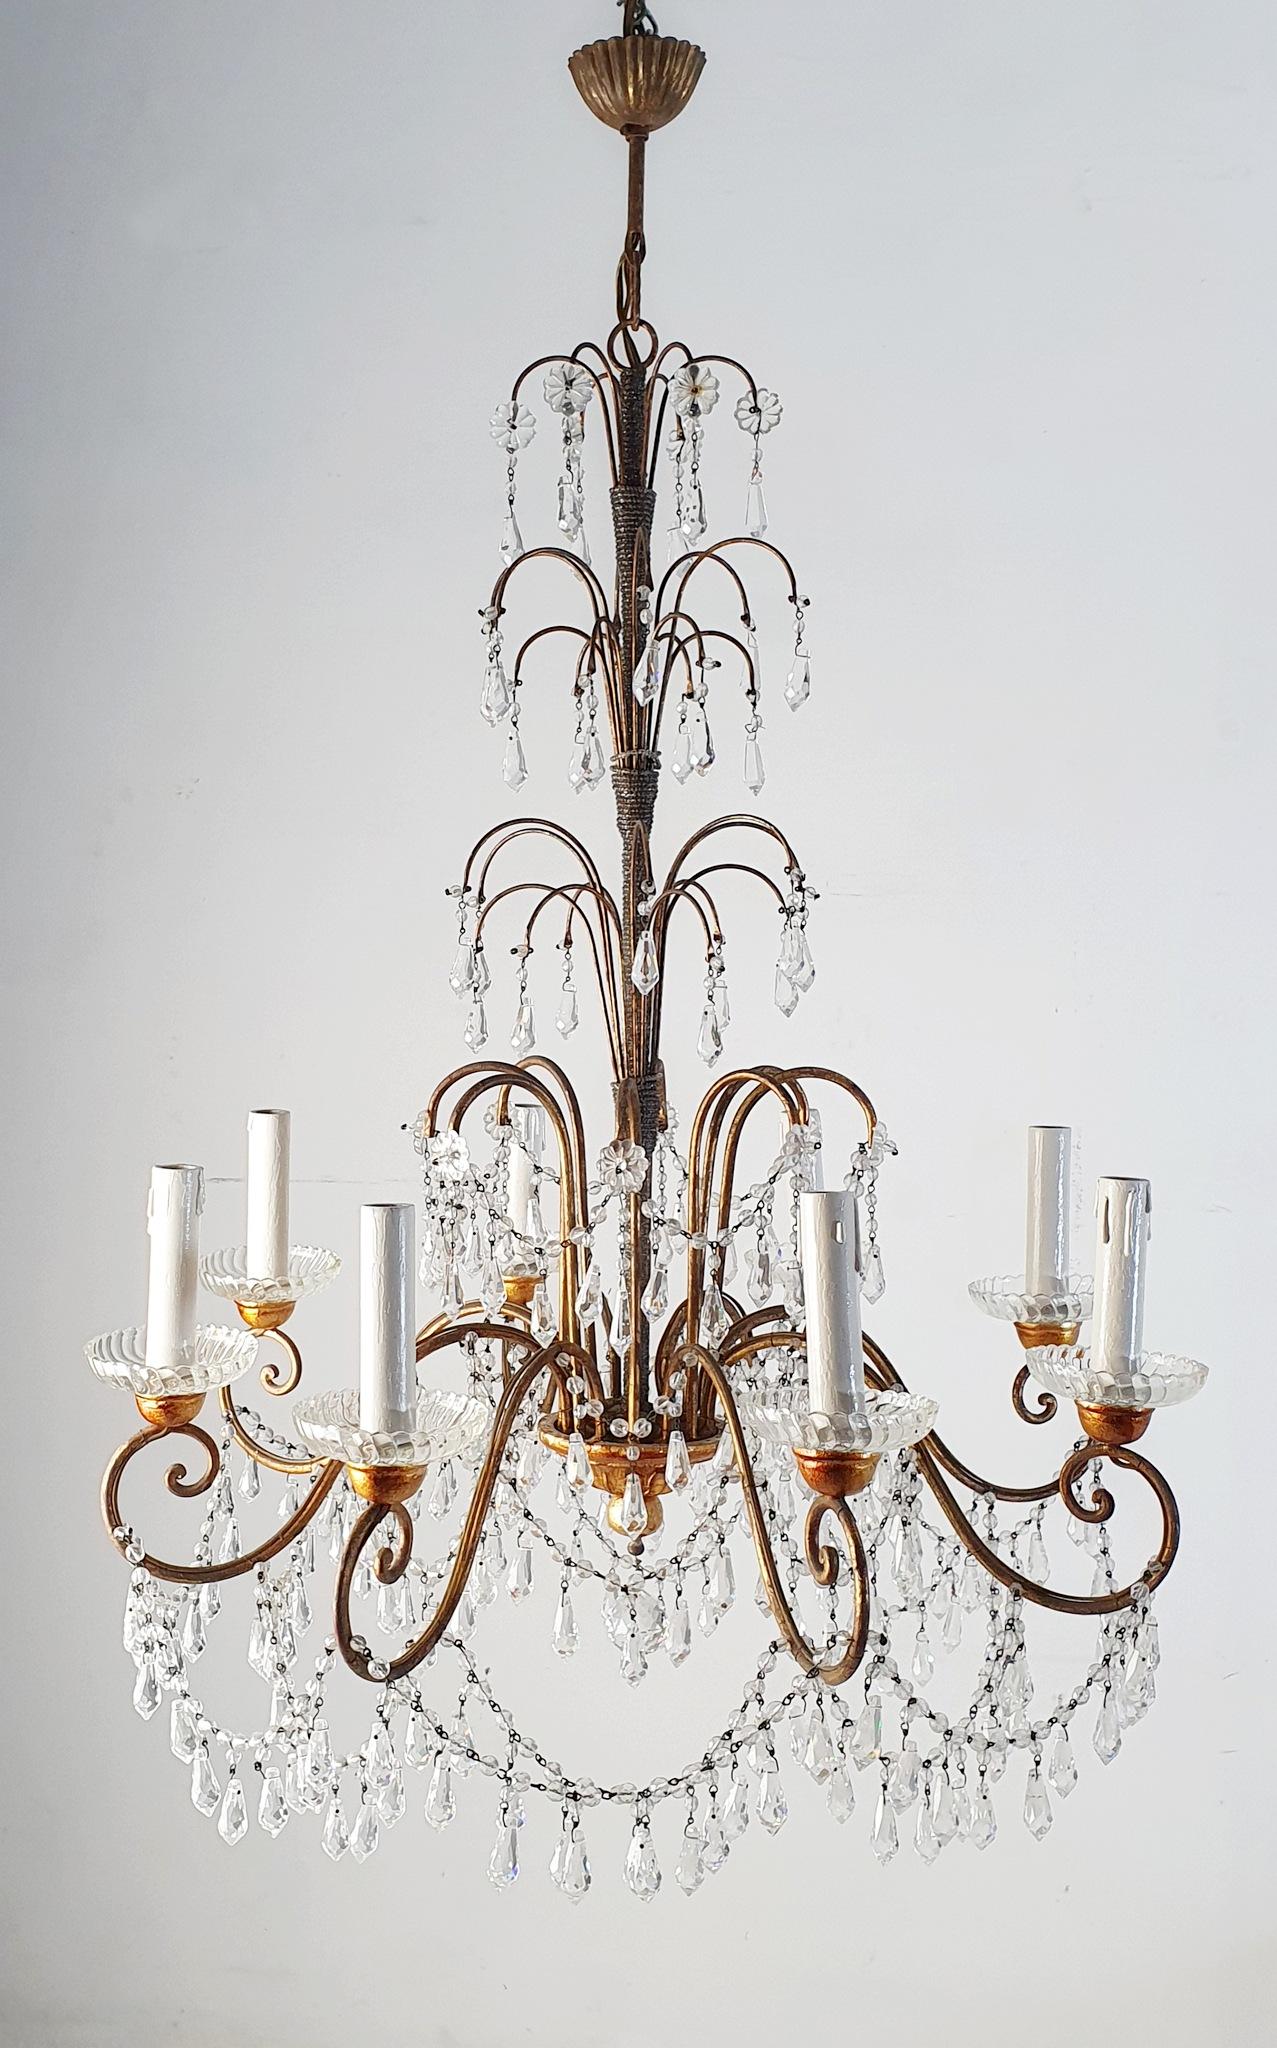 An Italian crystal chandelier in Empire style made with a guilded structure adorned with swags of crystals that glitter beautifully when lit up. This particular chandelier is free from decor apart from the guiliding, crystals and the beaded pearls